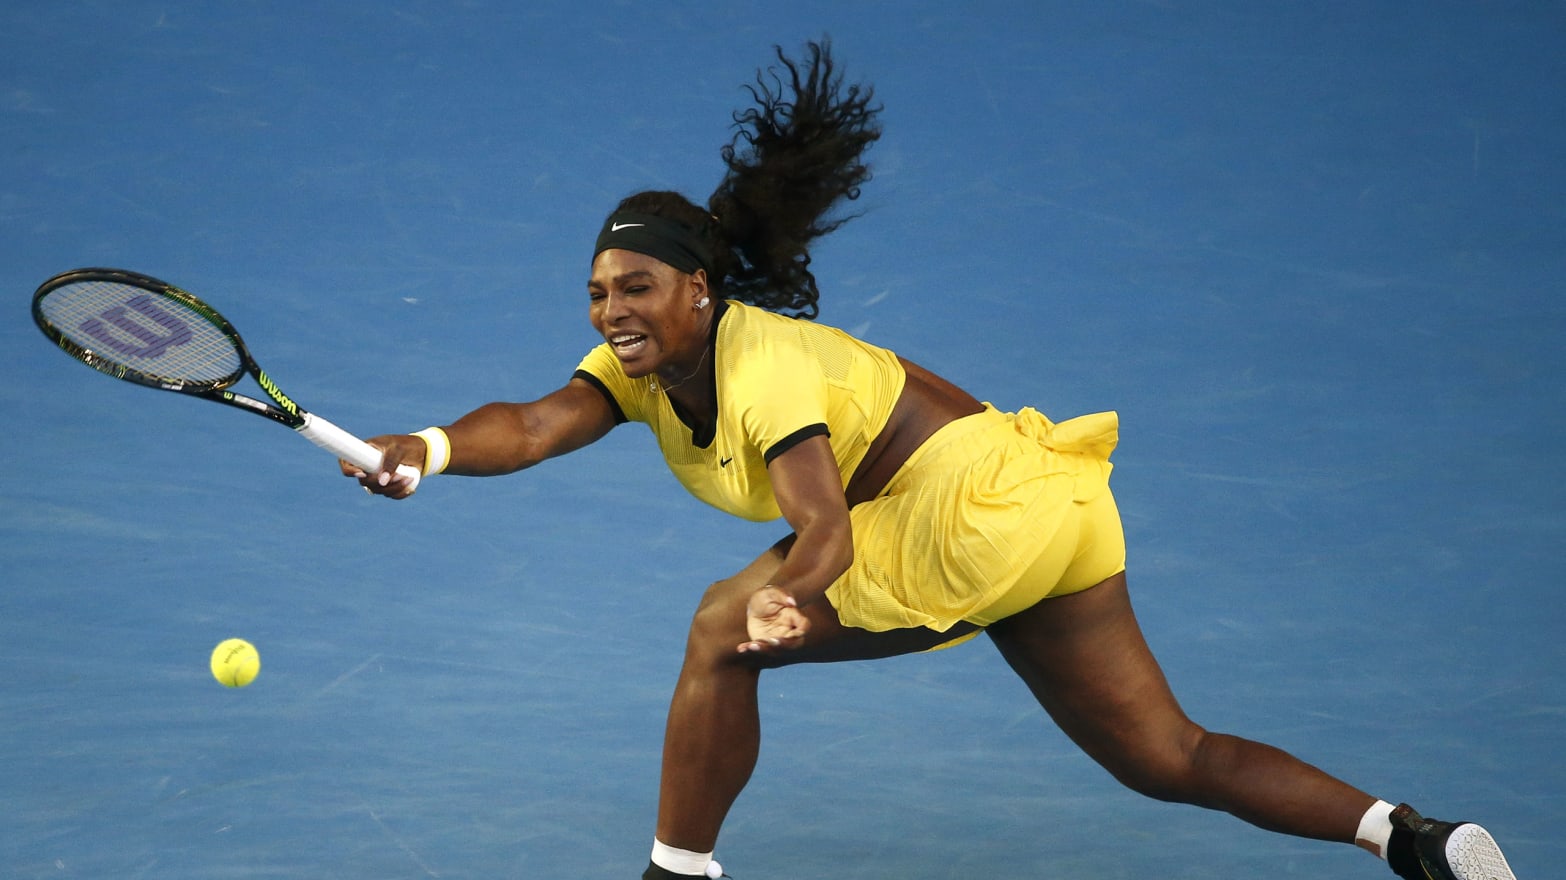 Is Serena Williams Underpaid? Women’s Tennis At Match Point1566 x 880